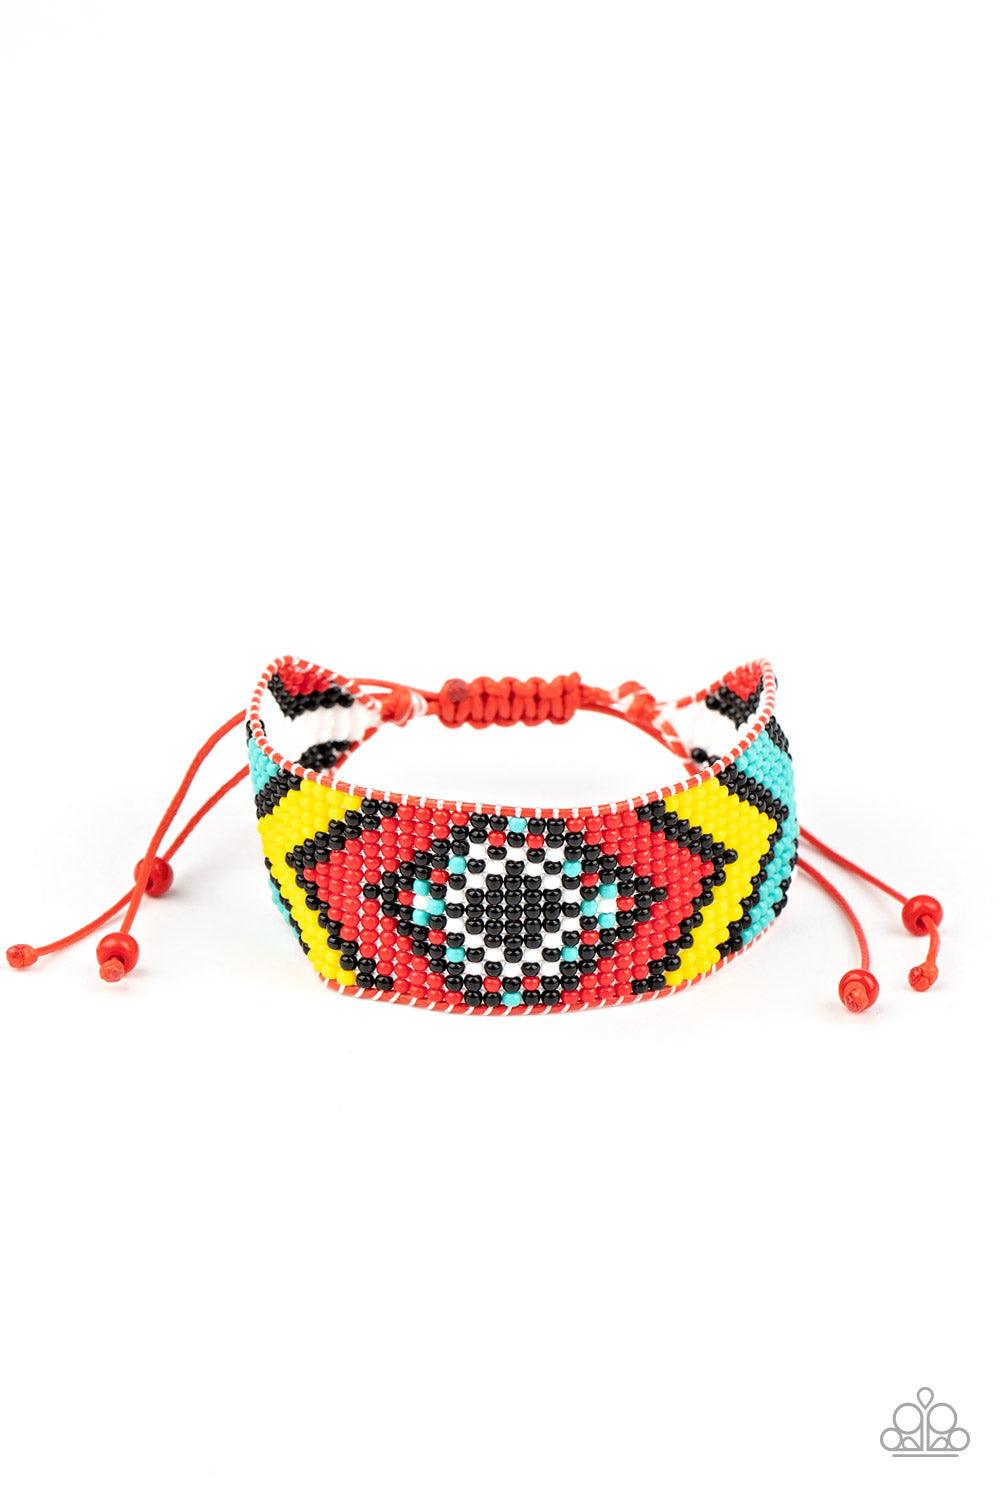 Paparazzi Accessories Desert Dive - Red A dainty collection of red, black, yellow, white, and turquoise beads are delicately weaved into a colorful textile pattern across the wrist for a southwestern inspired fashion. Features an adjustable sliding knot c